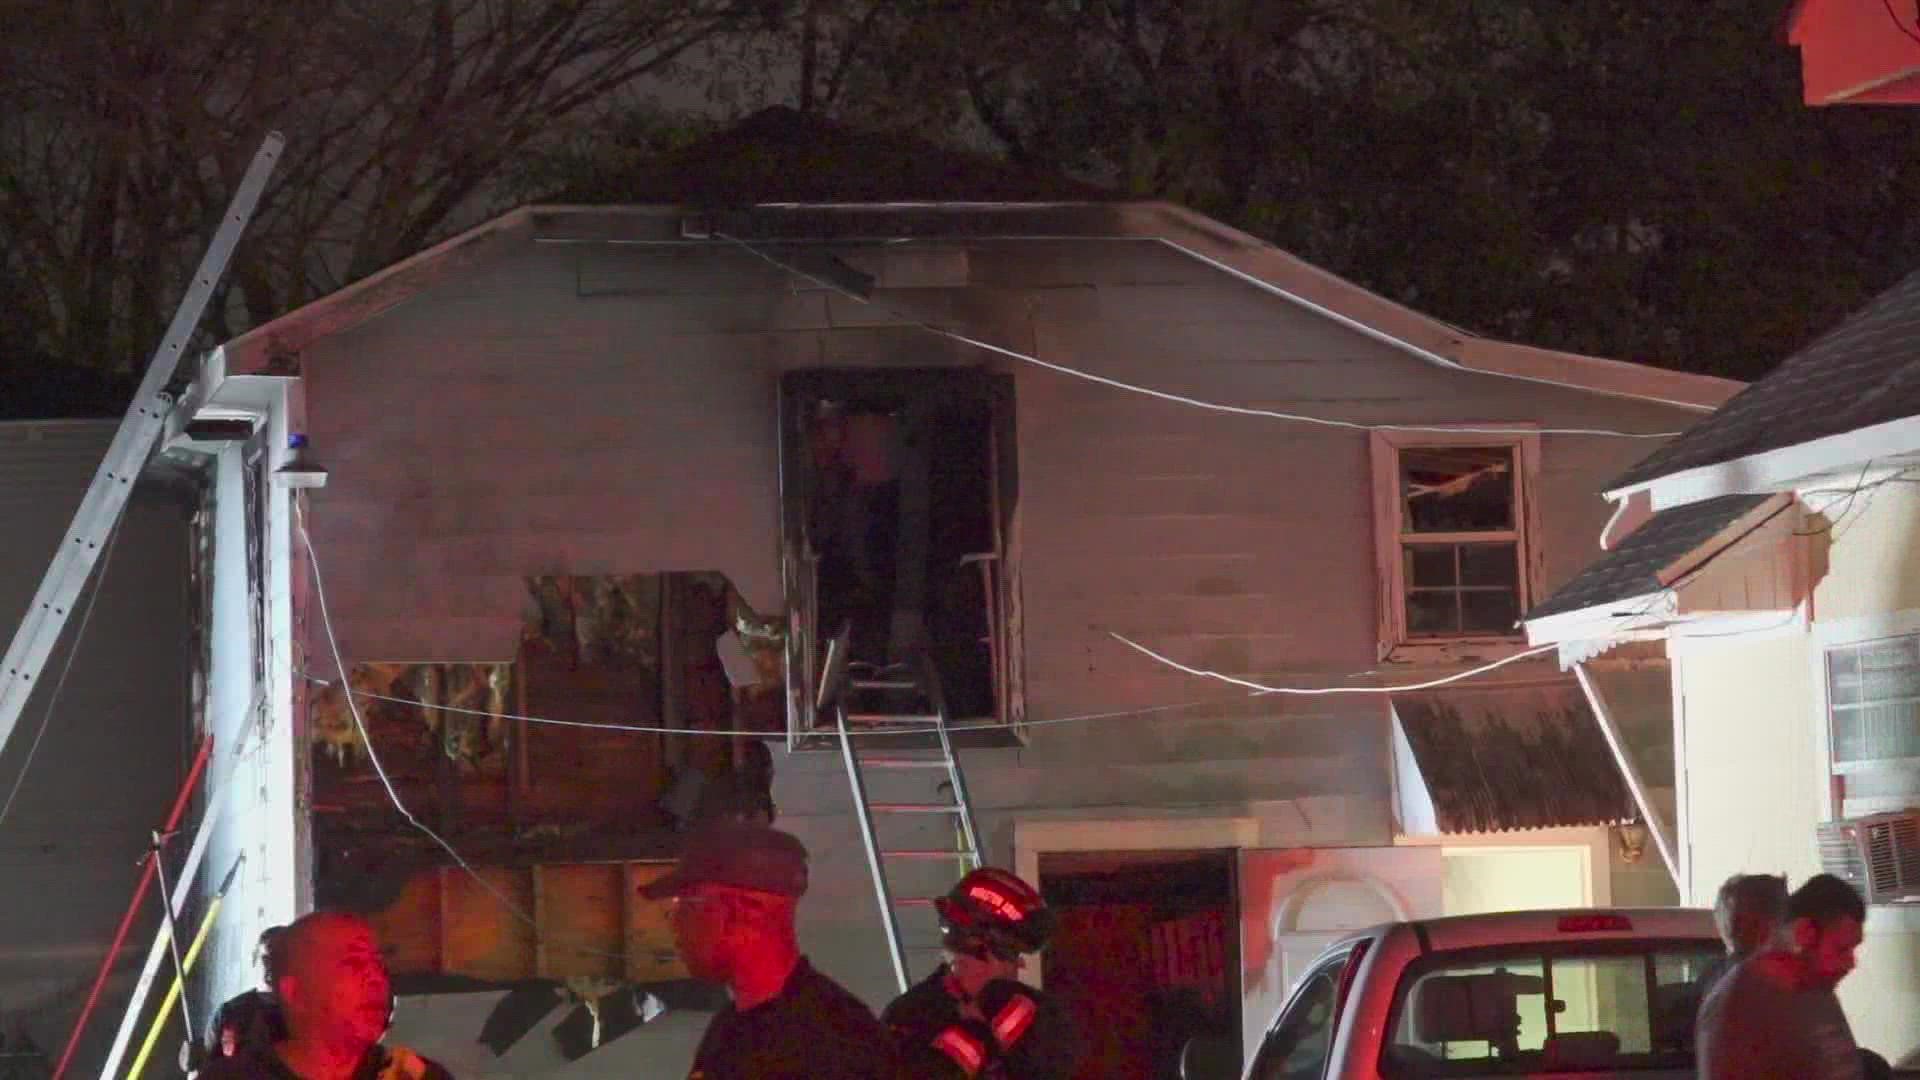 Houston firefighters say the one person that was injured in the fire had just moved into the duplex that same day.